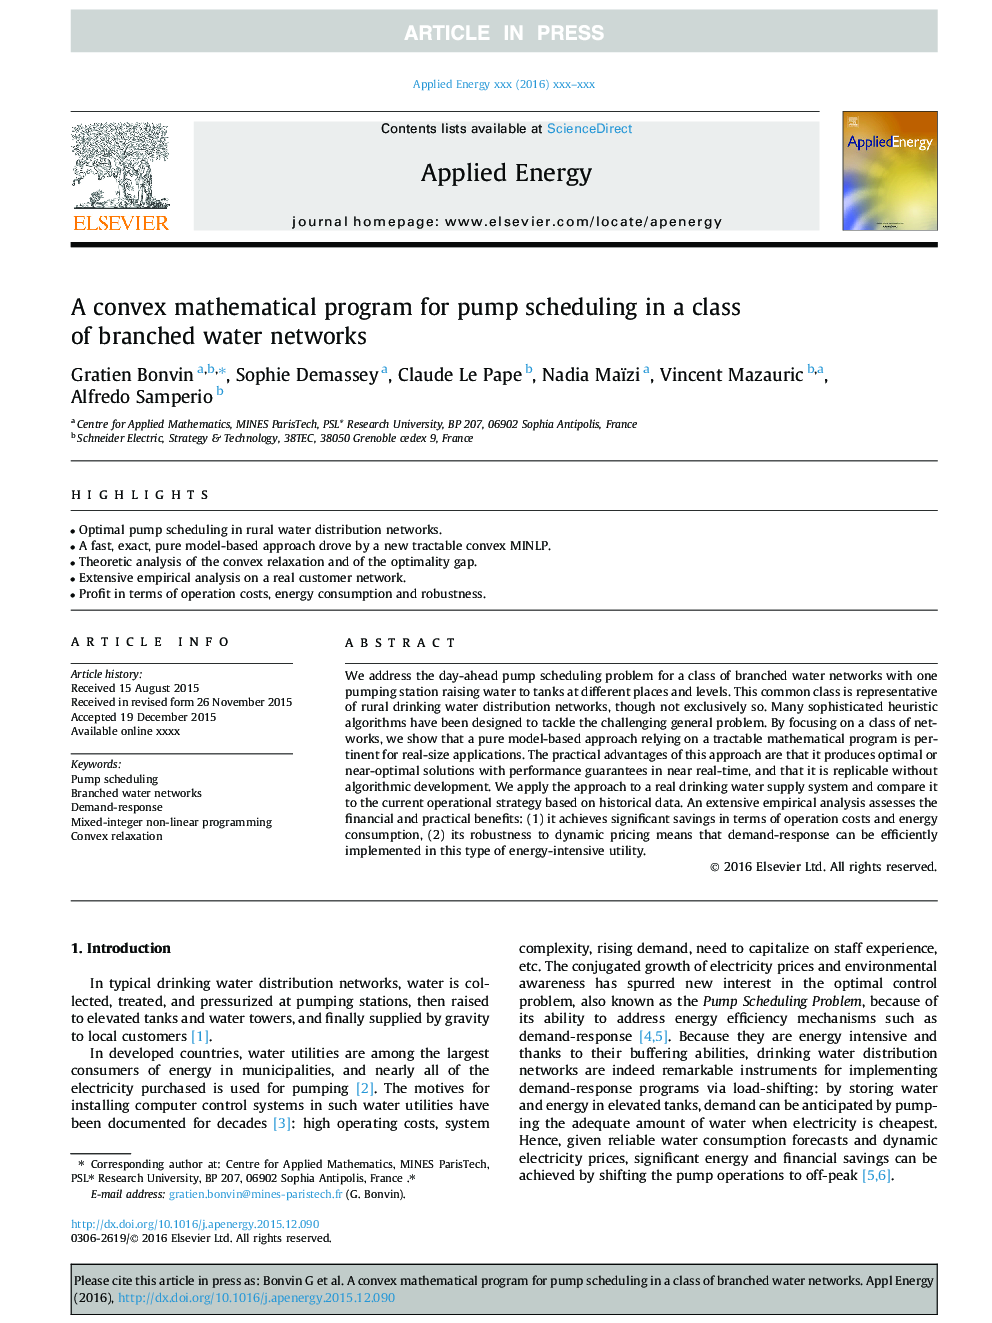 A convex mathematical program for pump scheduling in a class of branched water networks